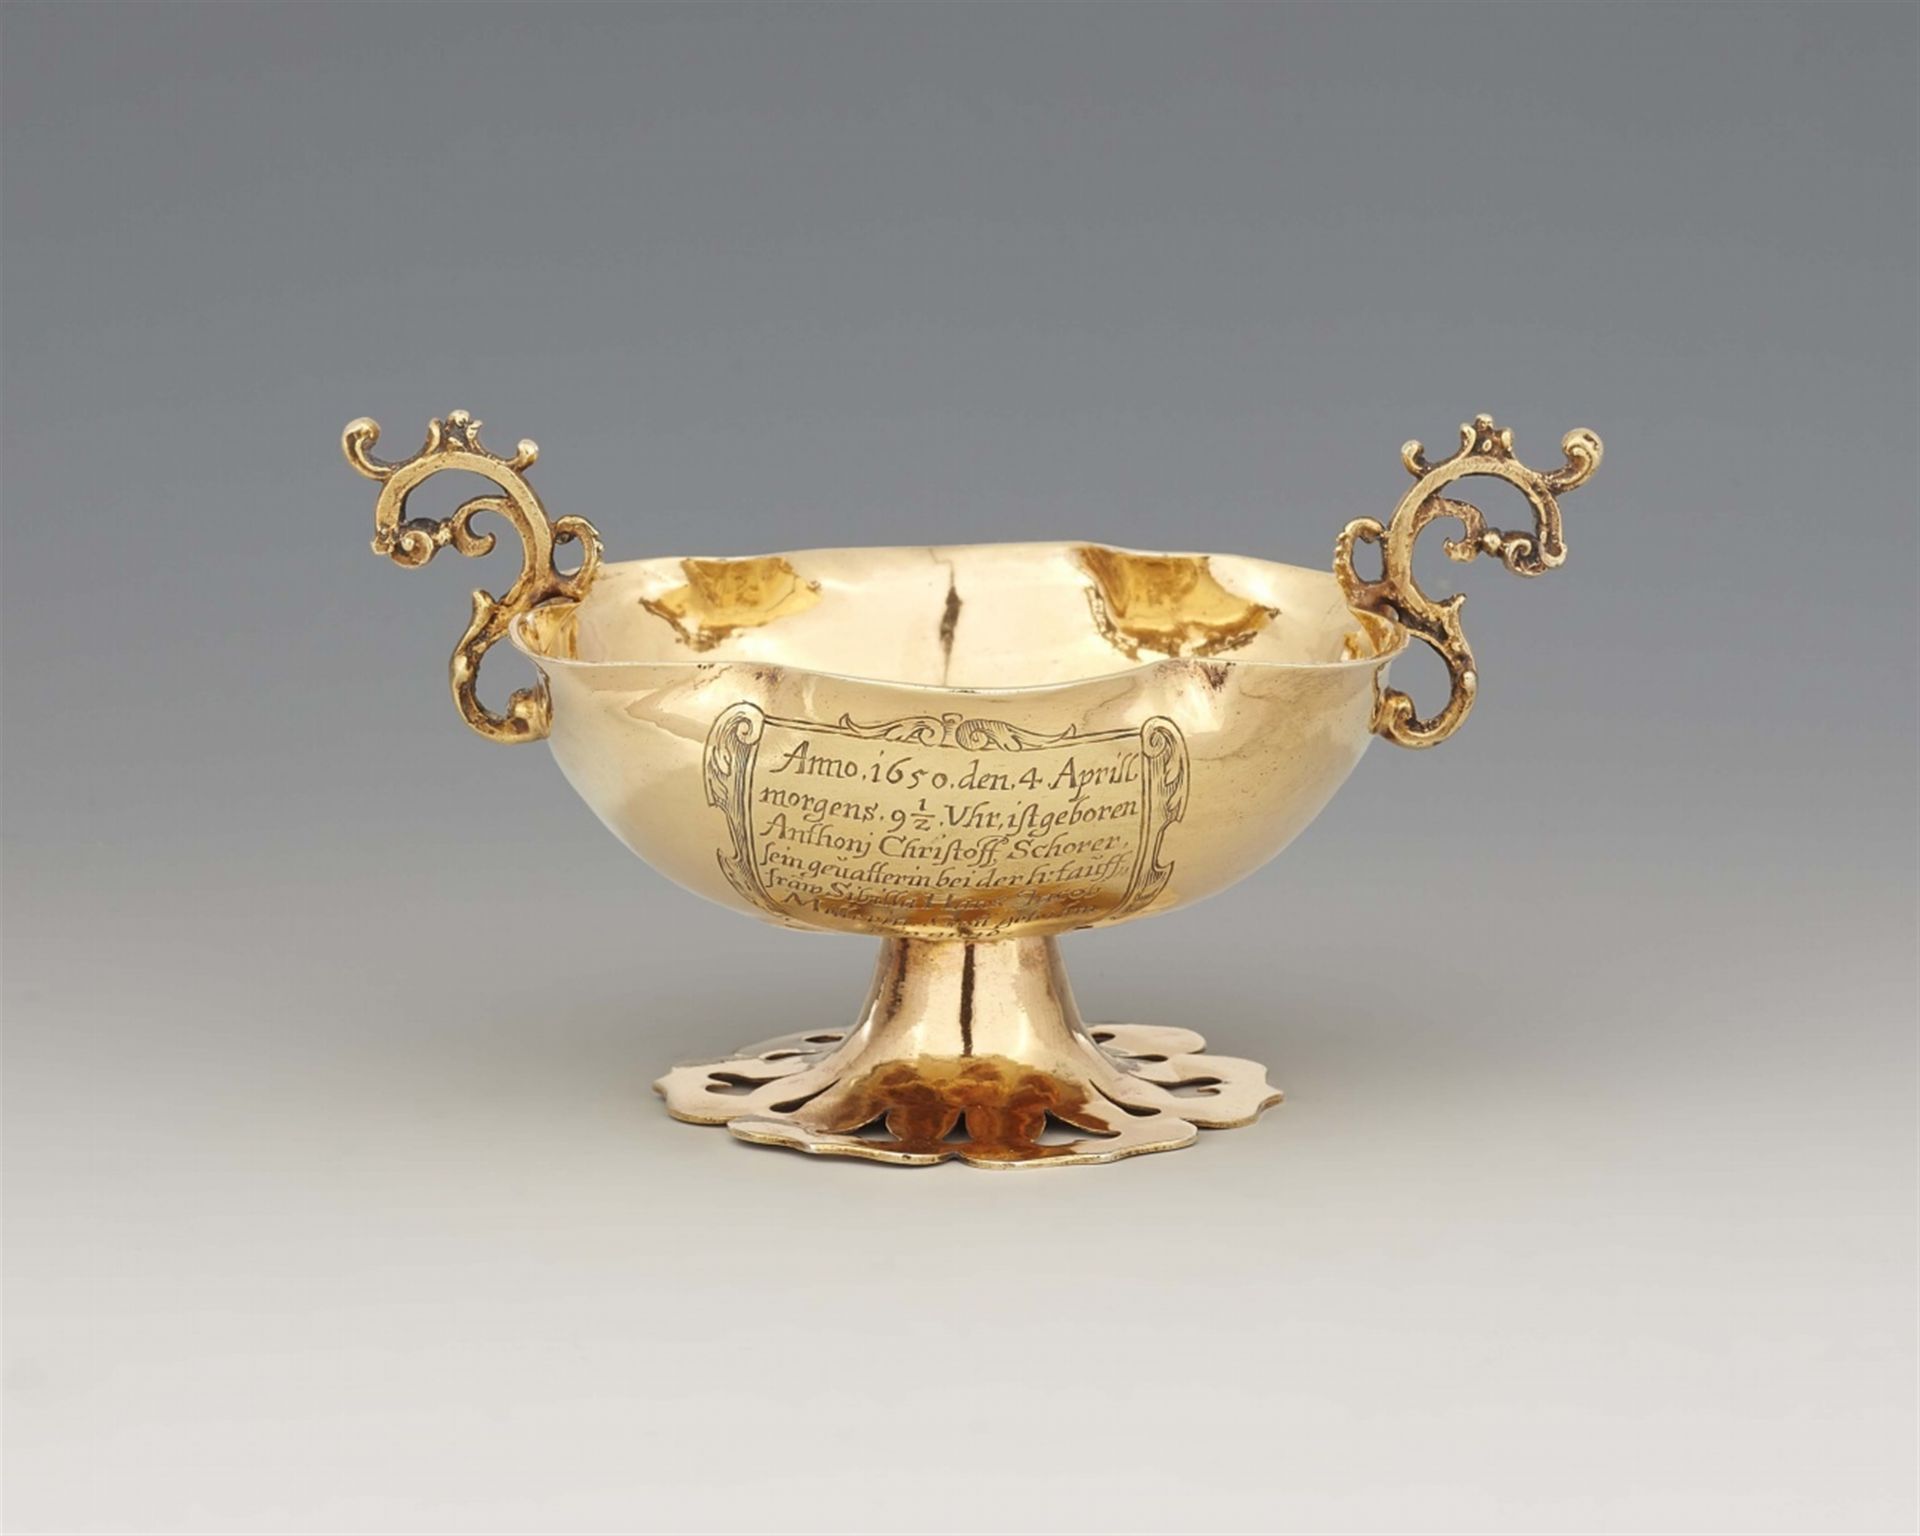 An Augsburg silver christening bowl